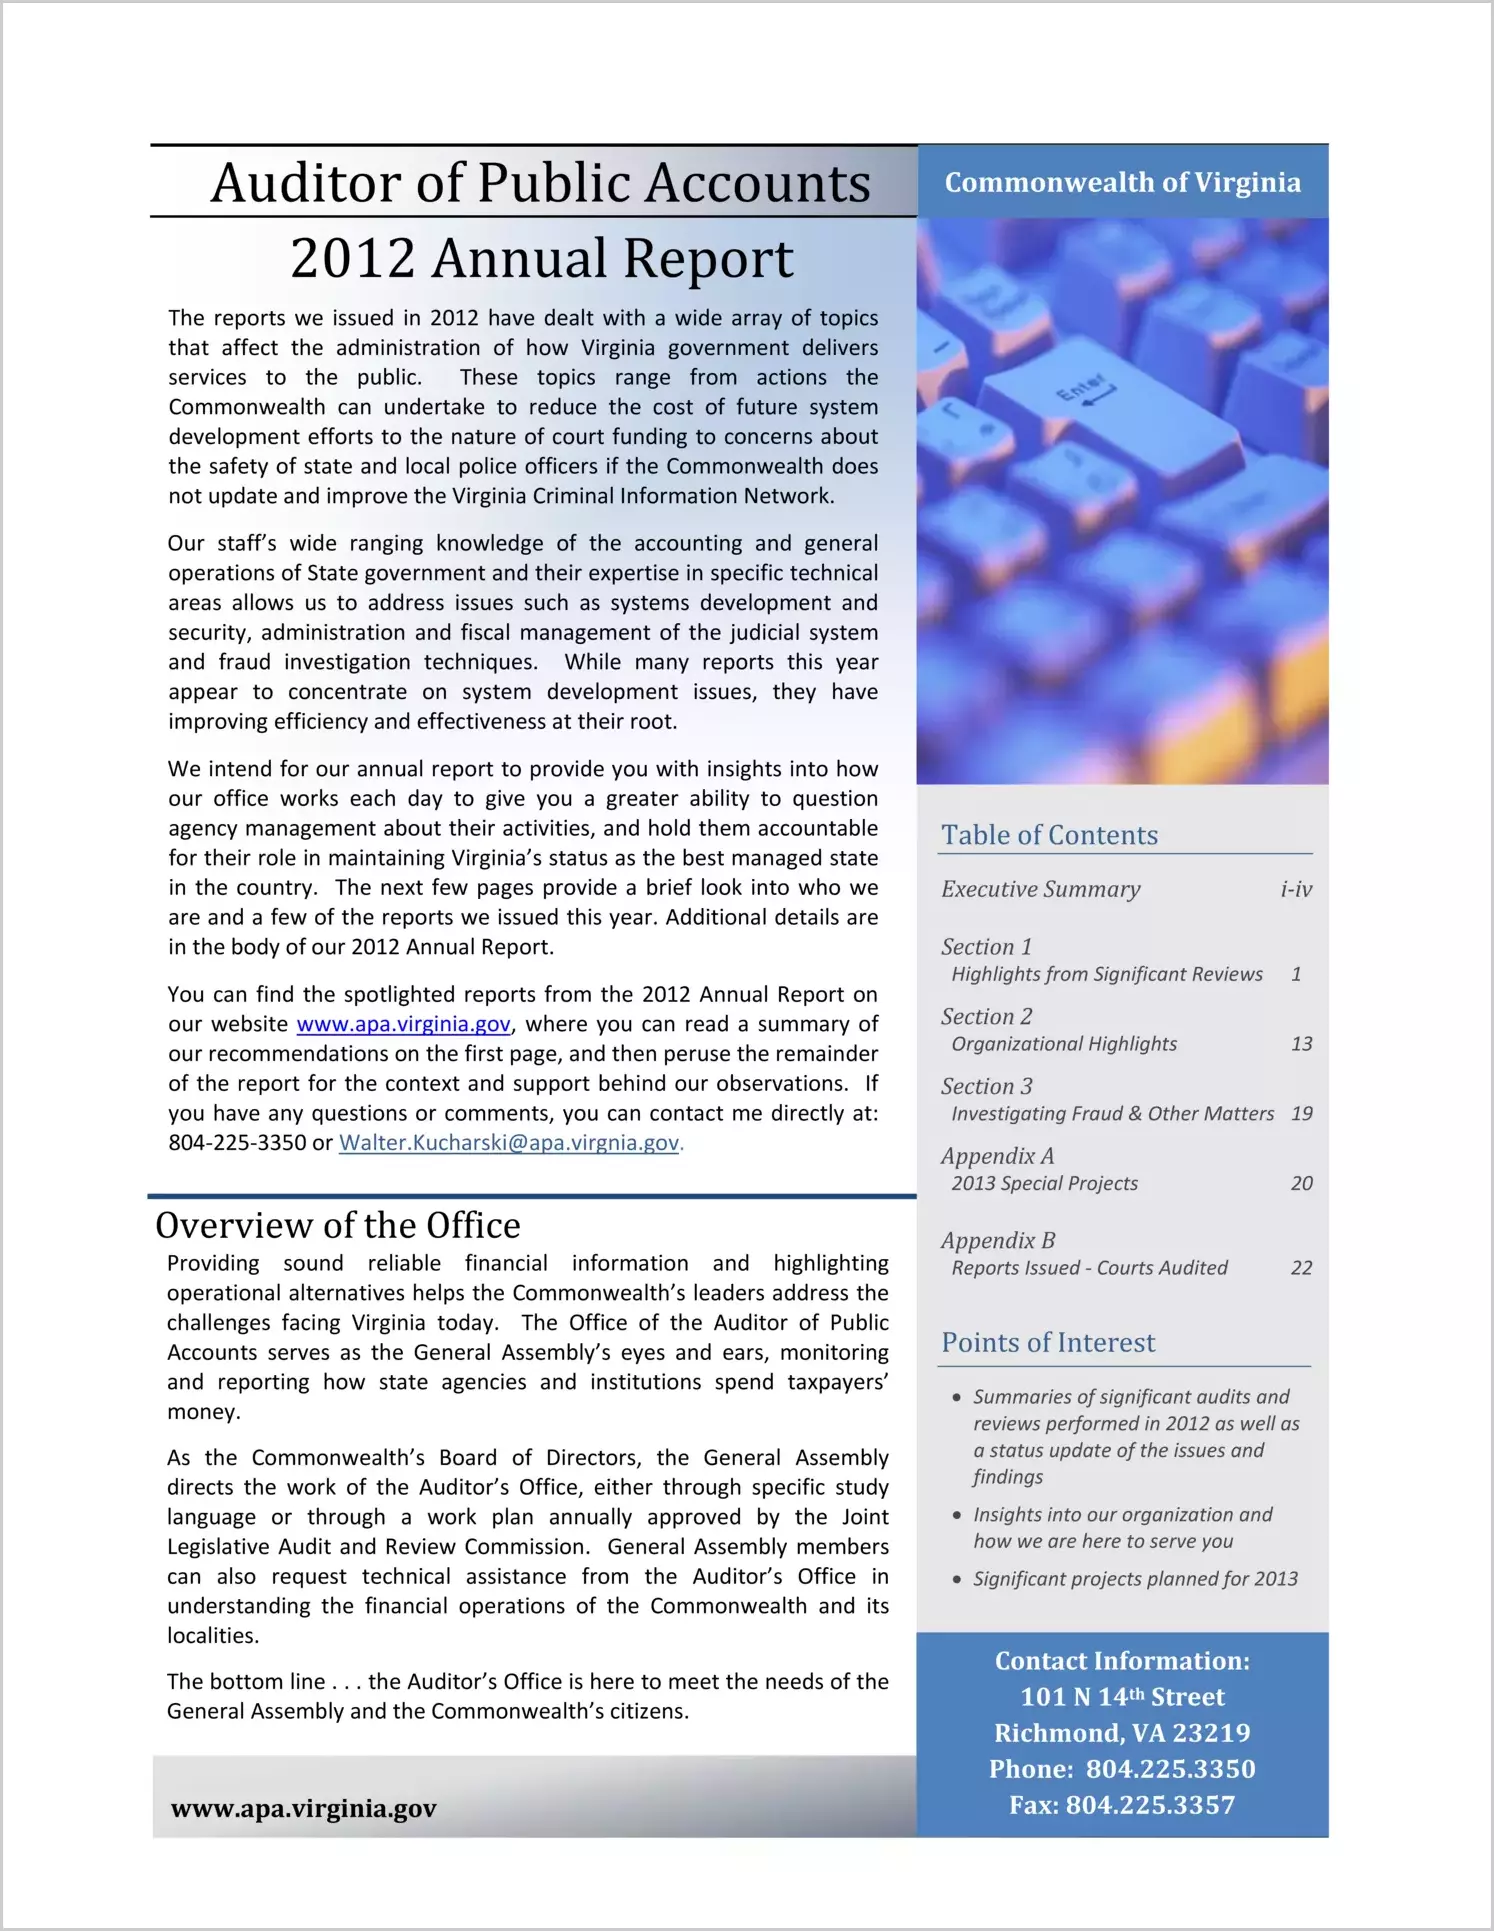 Auditor of Public Accounts Annual Report to the General Assembly for 2012